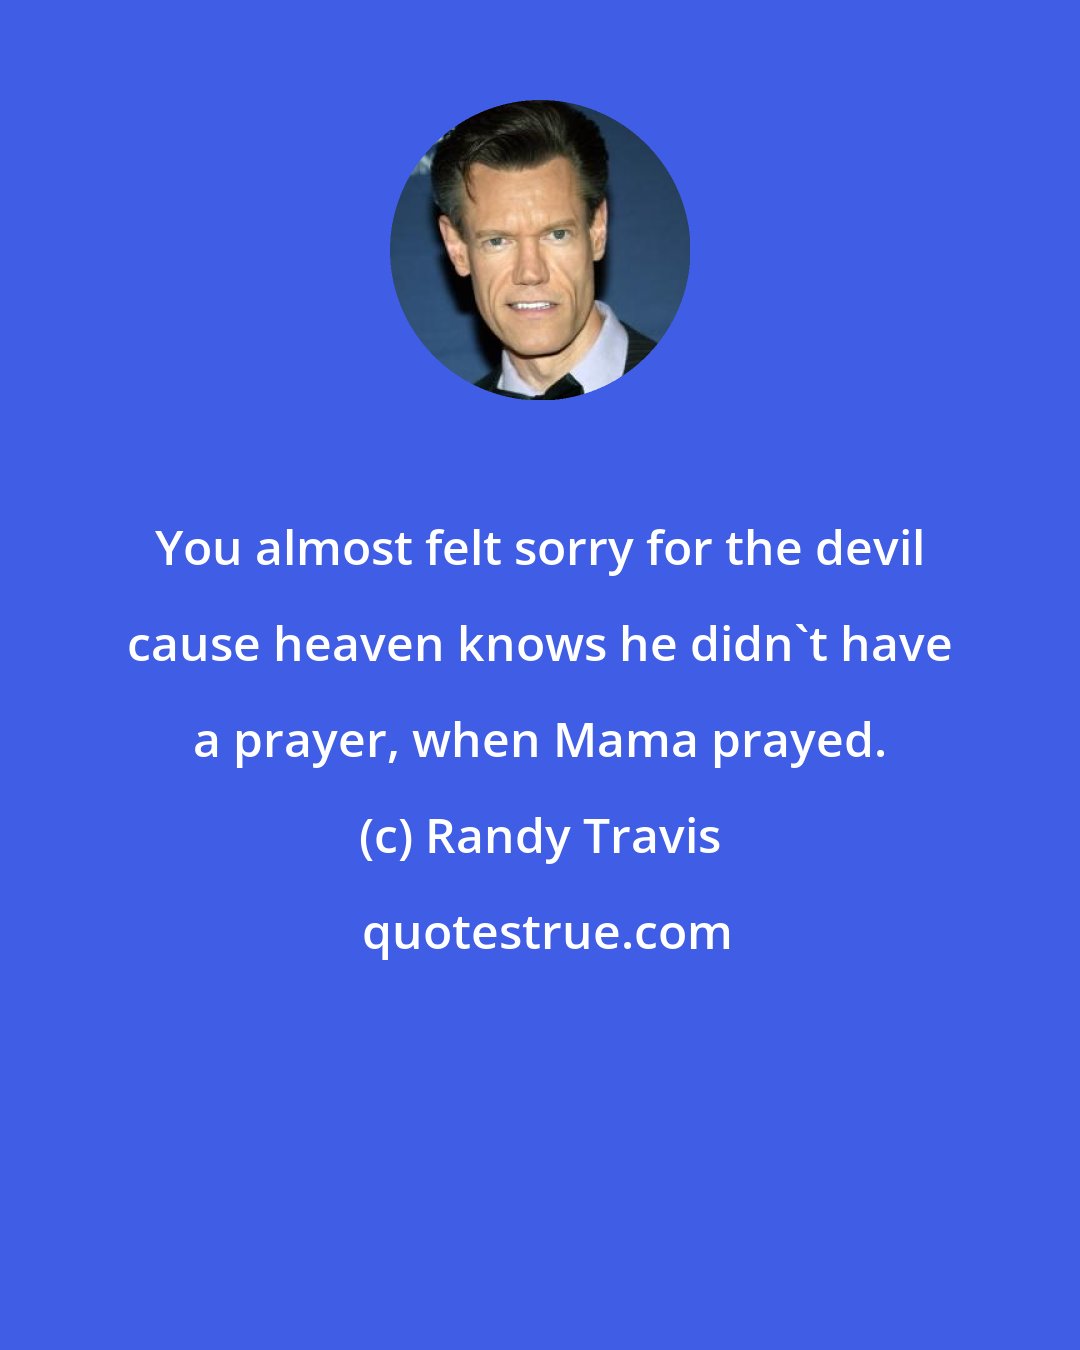 Randy Travis: You almost felt sorry for the devil cause heaven knows he didn't have a prayer, when Mama prayed.